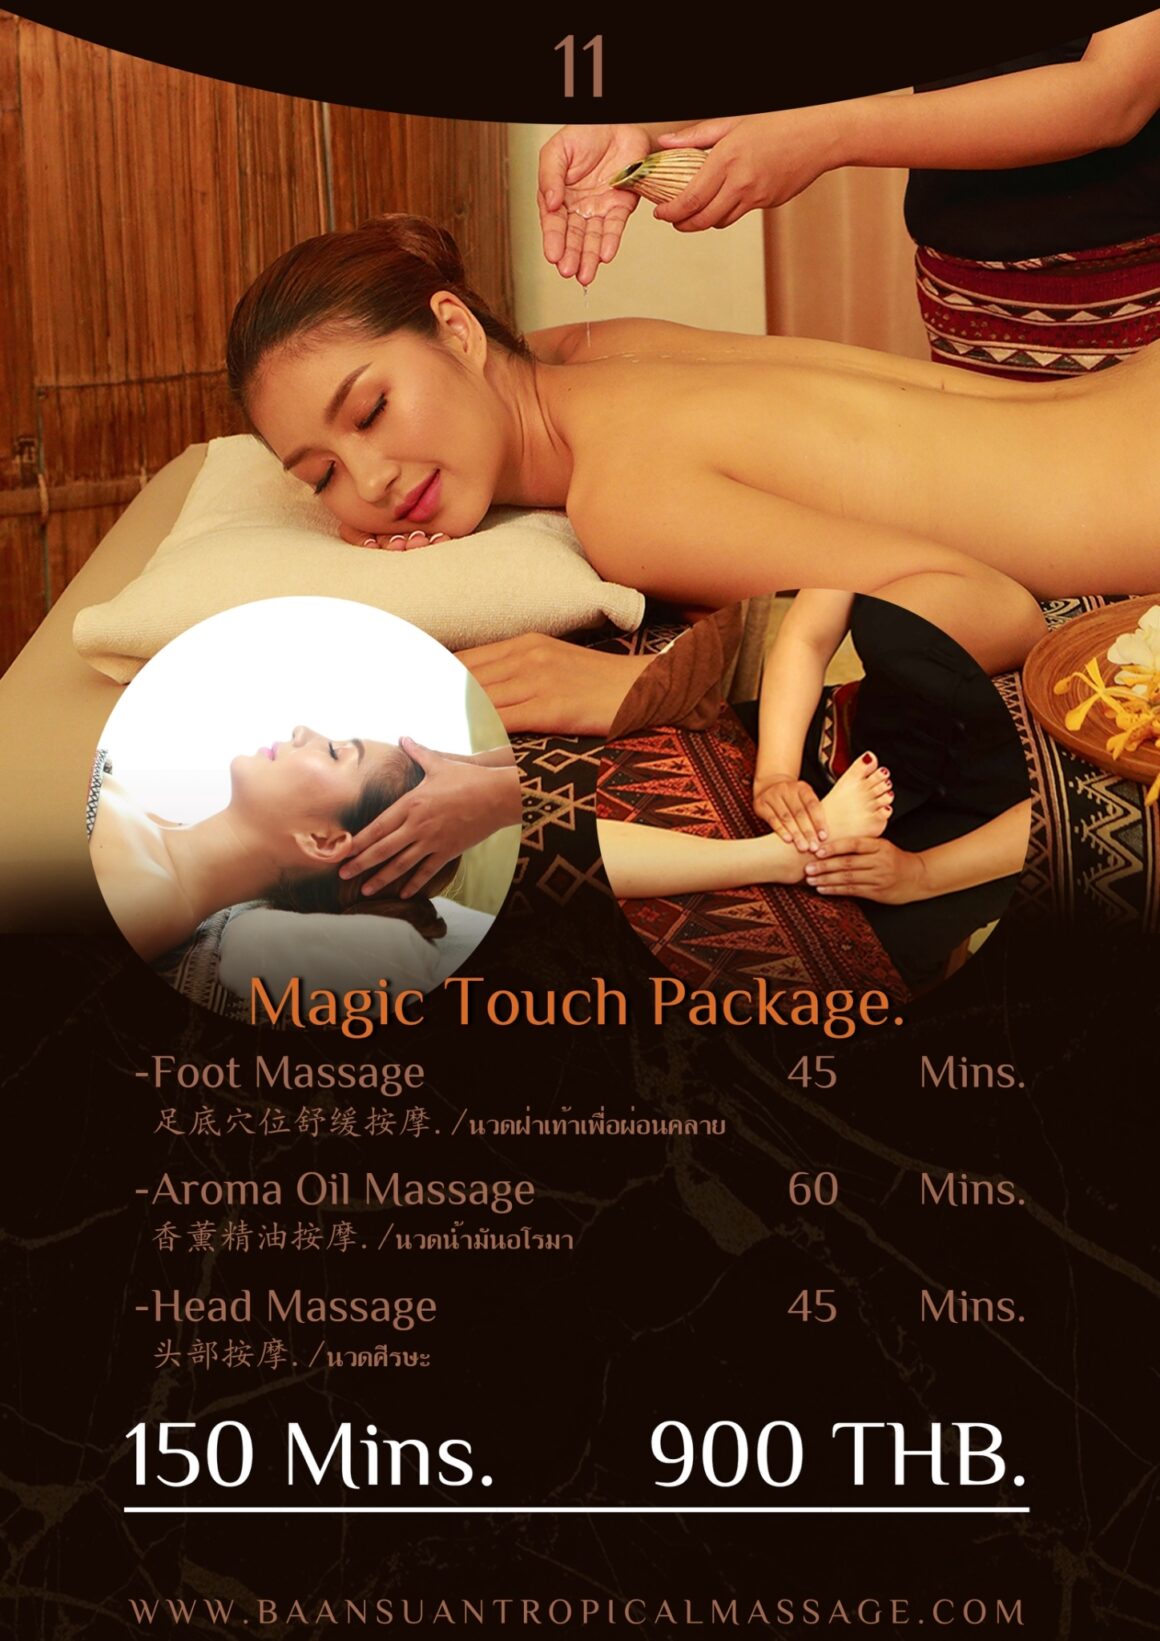 11.Magic Touch Package. 